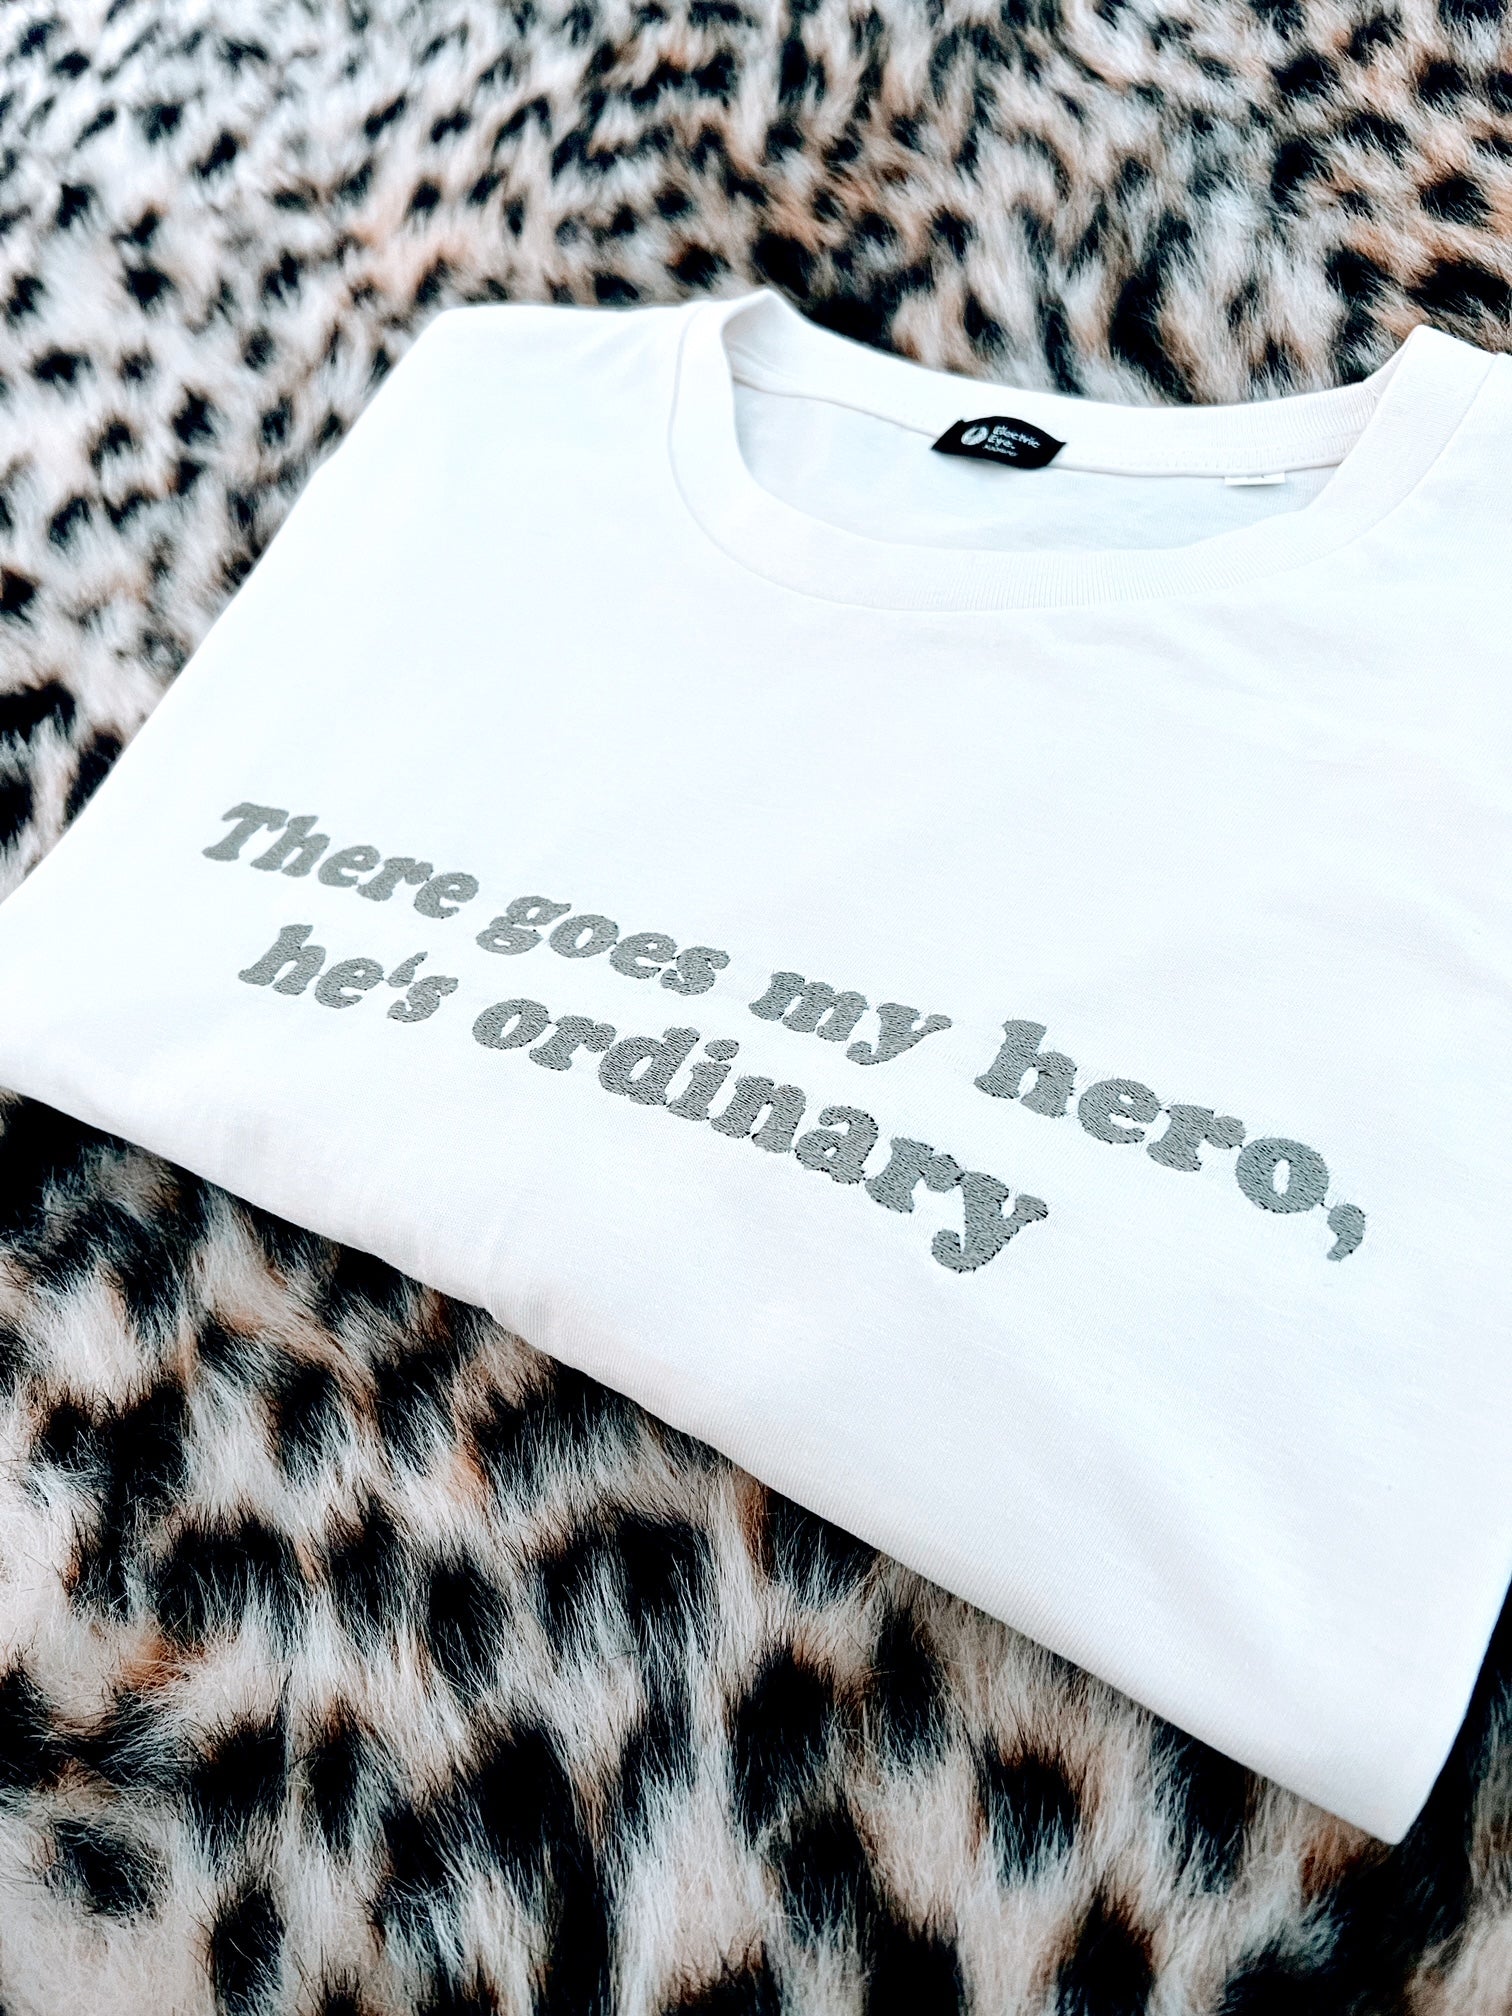 'THERE GOES MY HERO, HE'S ORDINARY' EMBROIDERED UNISEX MEDIUM FIT ORGANIC COTTON 'ROCKER' T-SHIRT